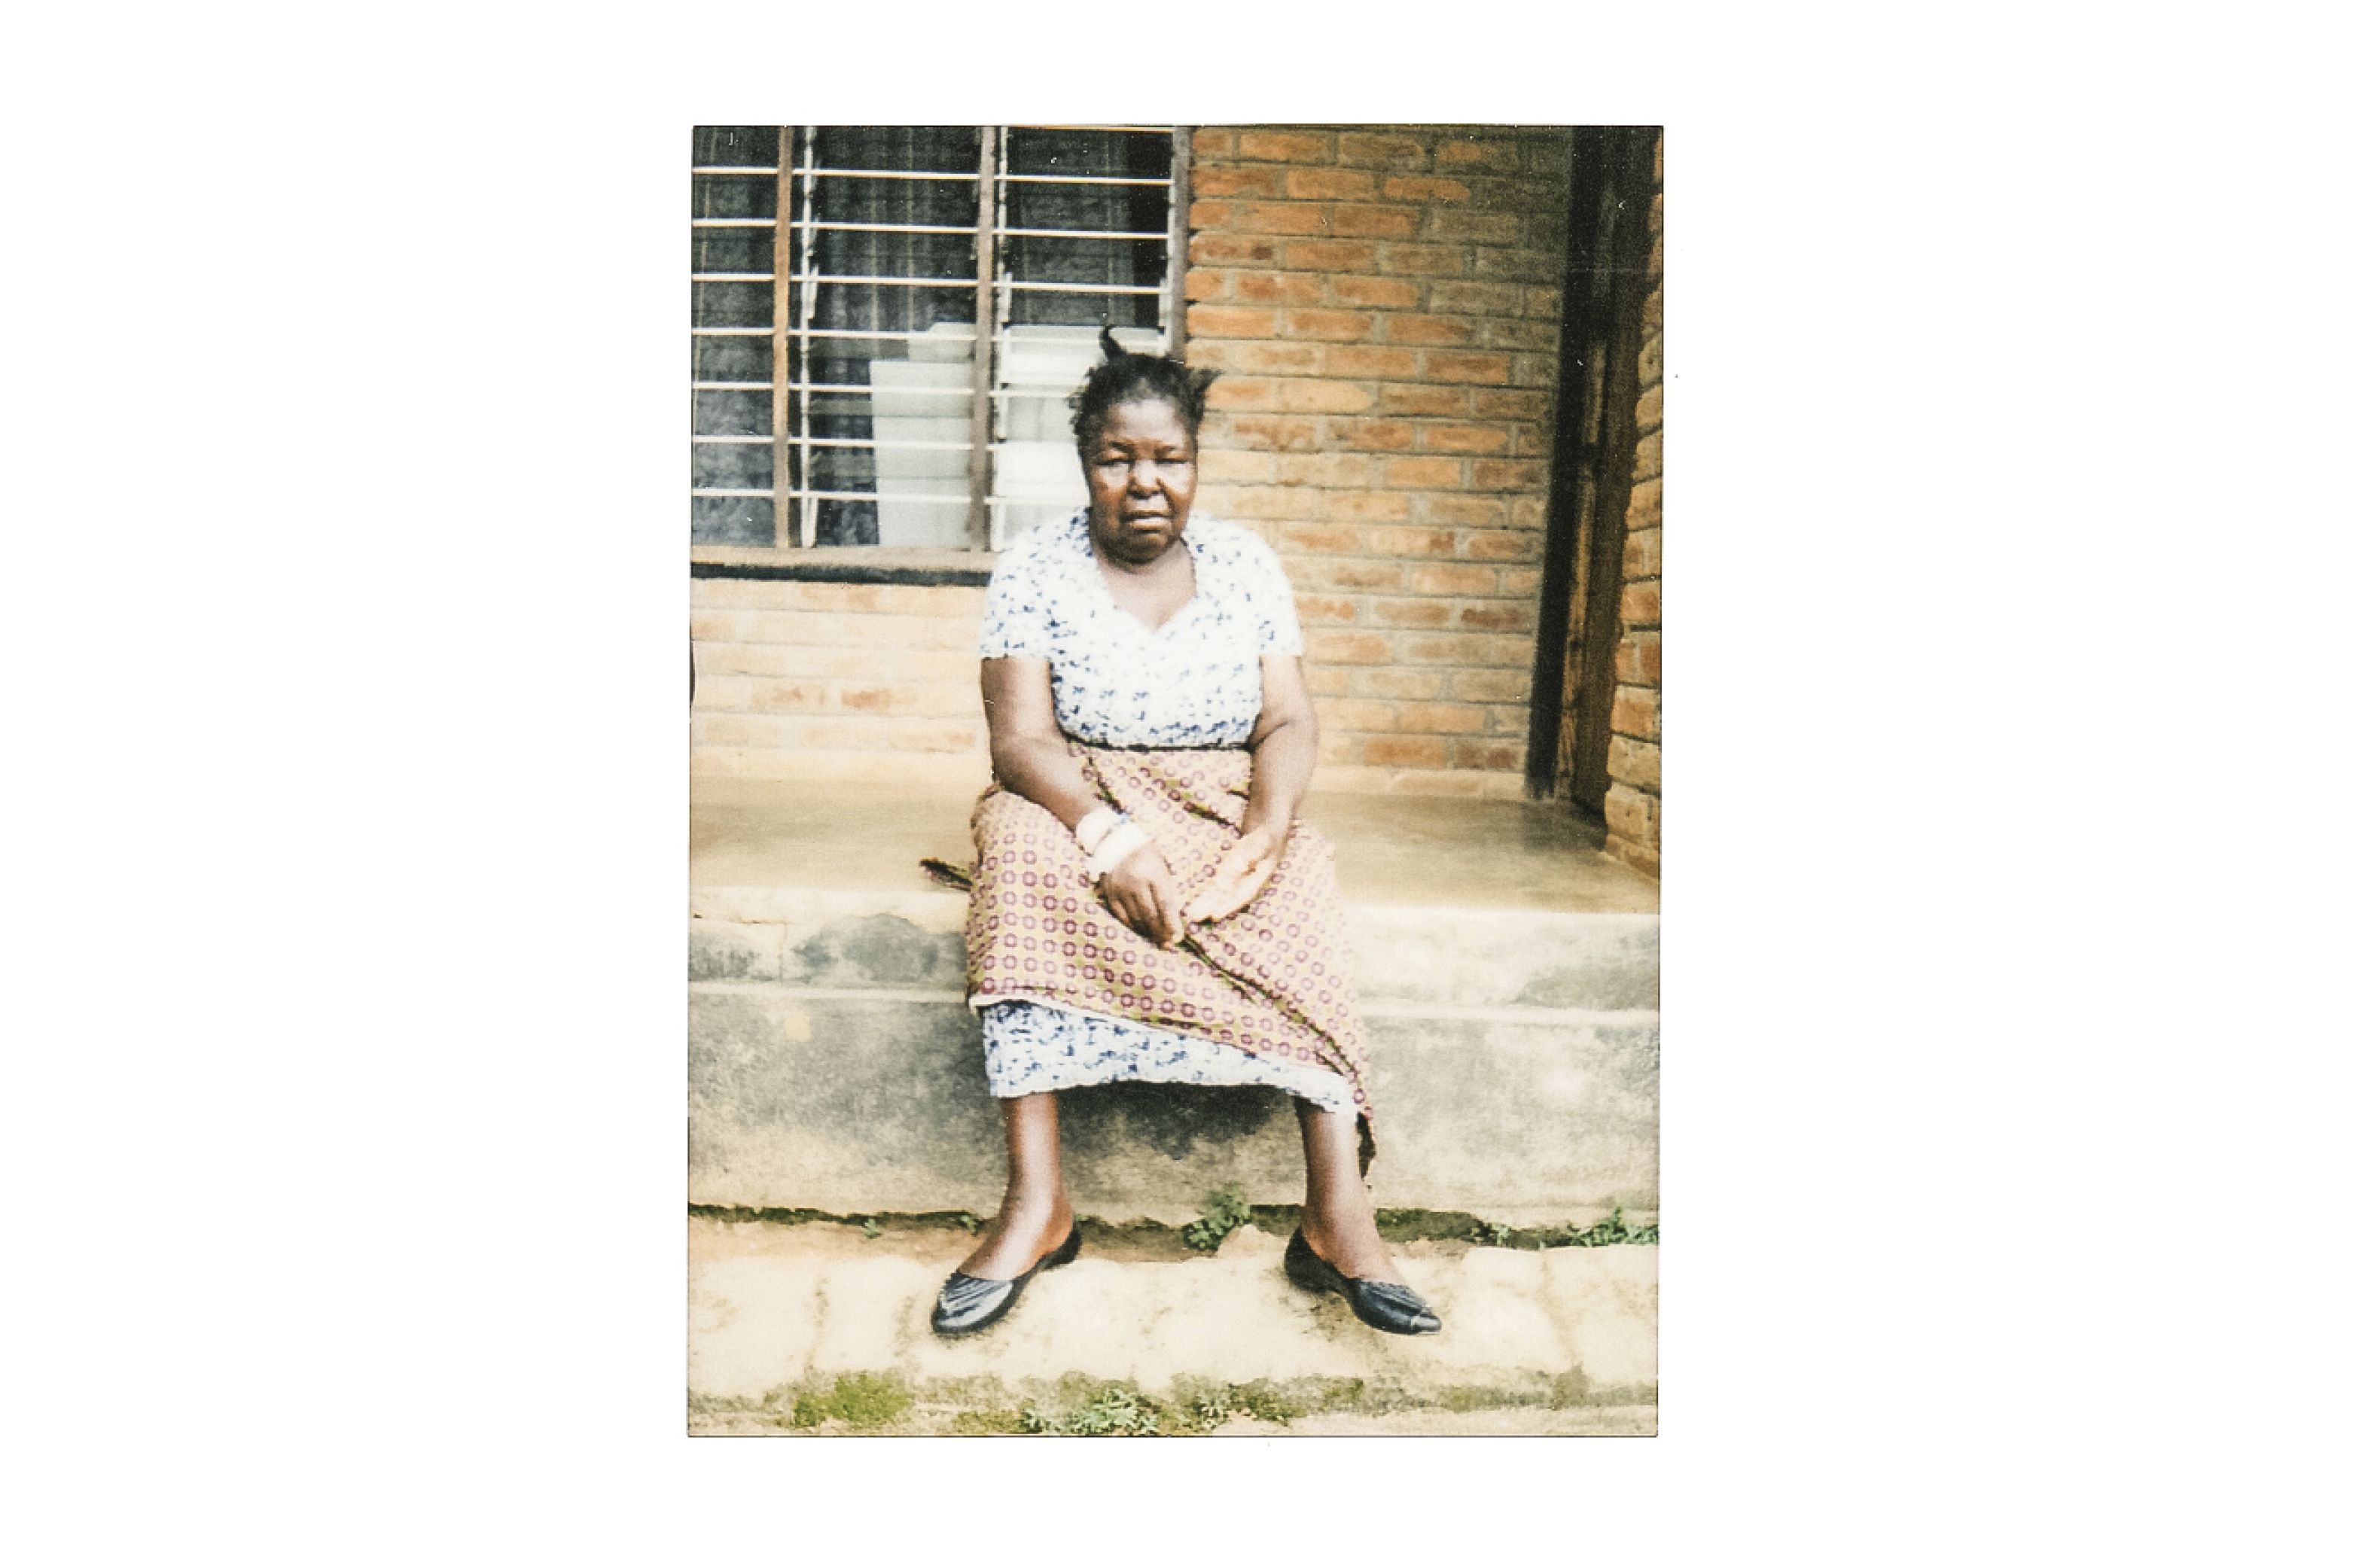 In Chintheche hospital, Ms. Phirie suffers from lung problems. She has been cooking over open fires all her life. Image by Nathalie Bertrams. Malawi, 2017.